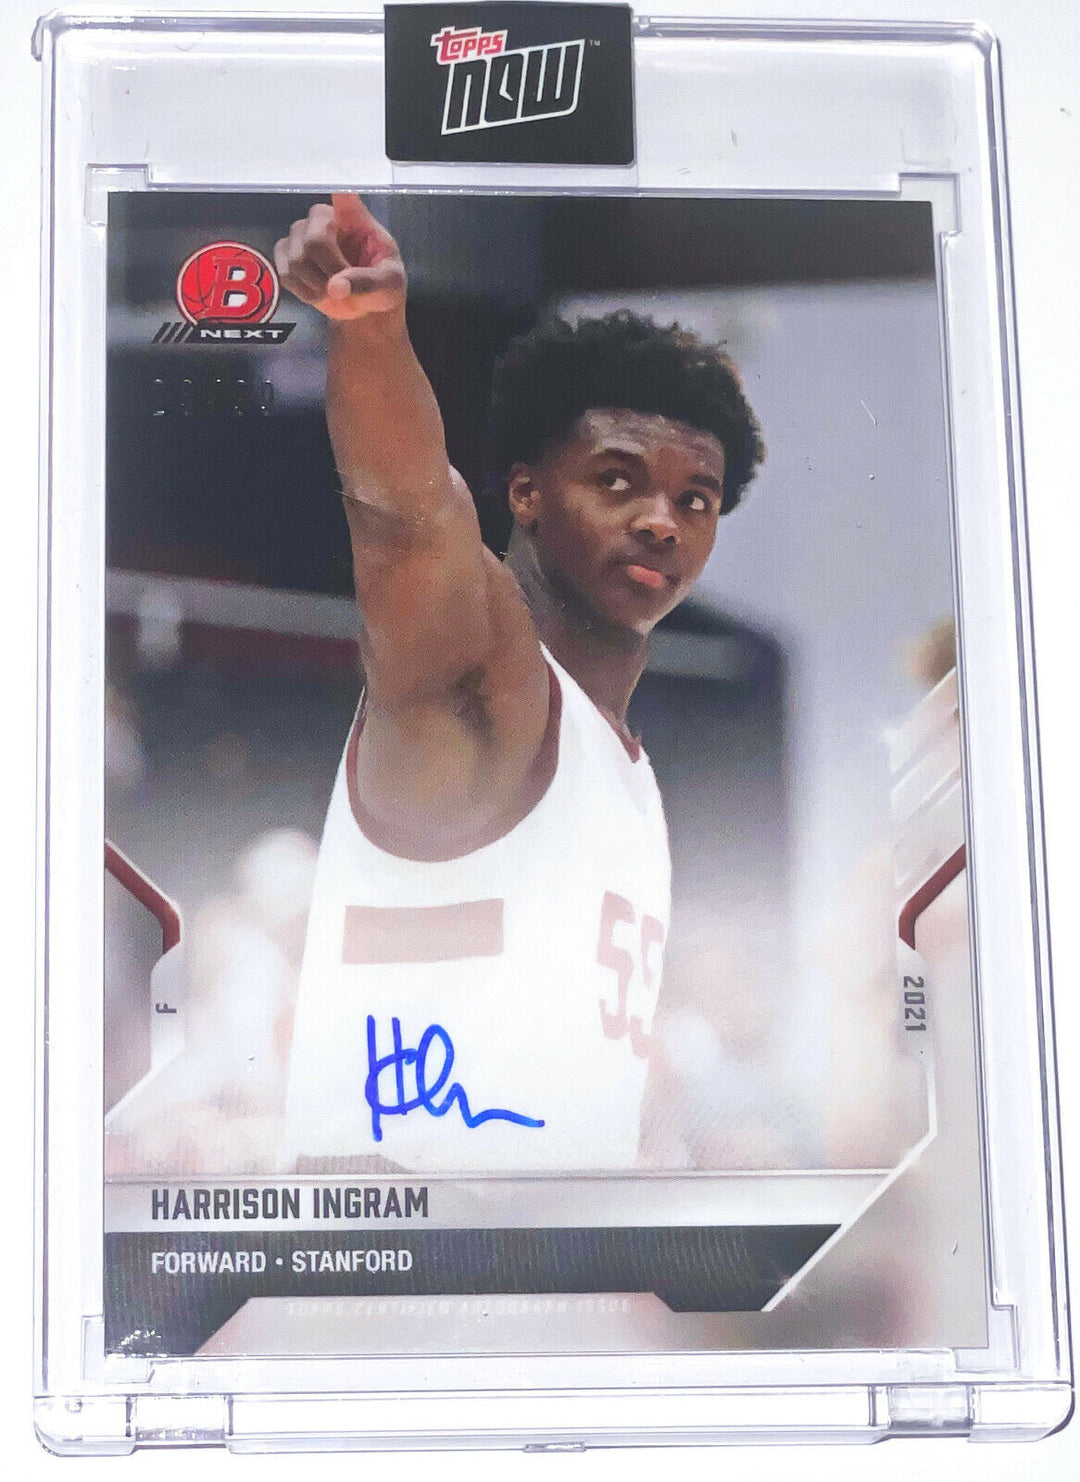 HARRISON INGRAM SIGNED BOWMAN NEXT TOPPS NOW STANFORD FORWARD BASKETBALL CARD 9A Image 3